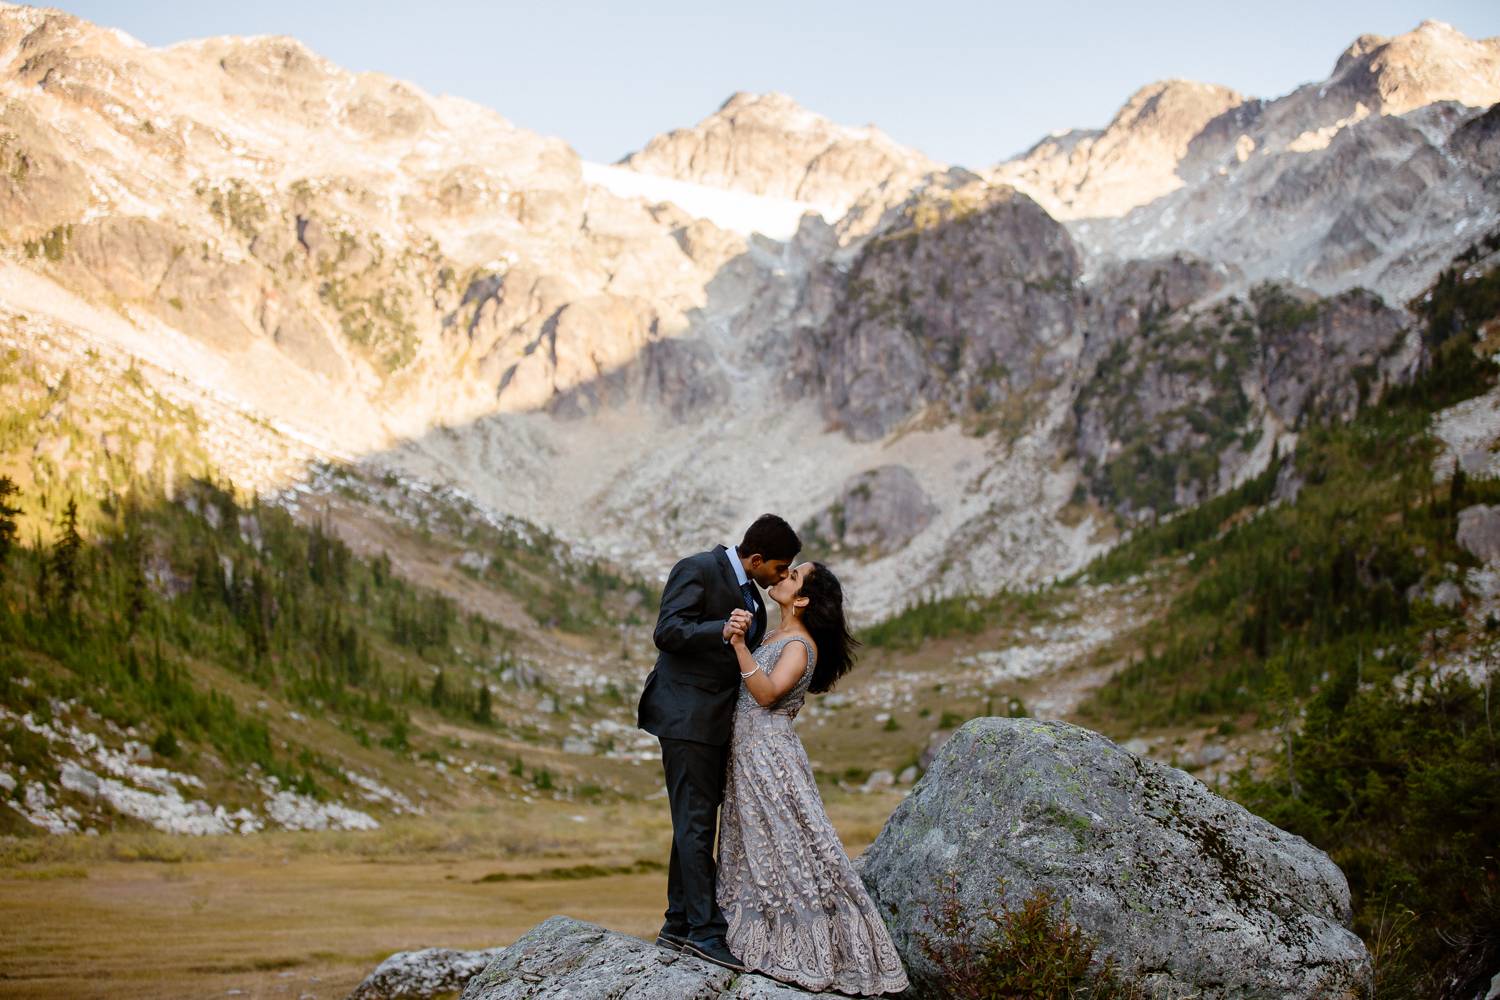 Tips to look good hiking for your adventure wedding photos